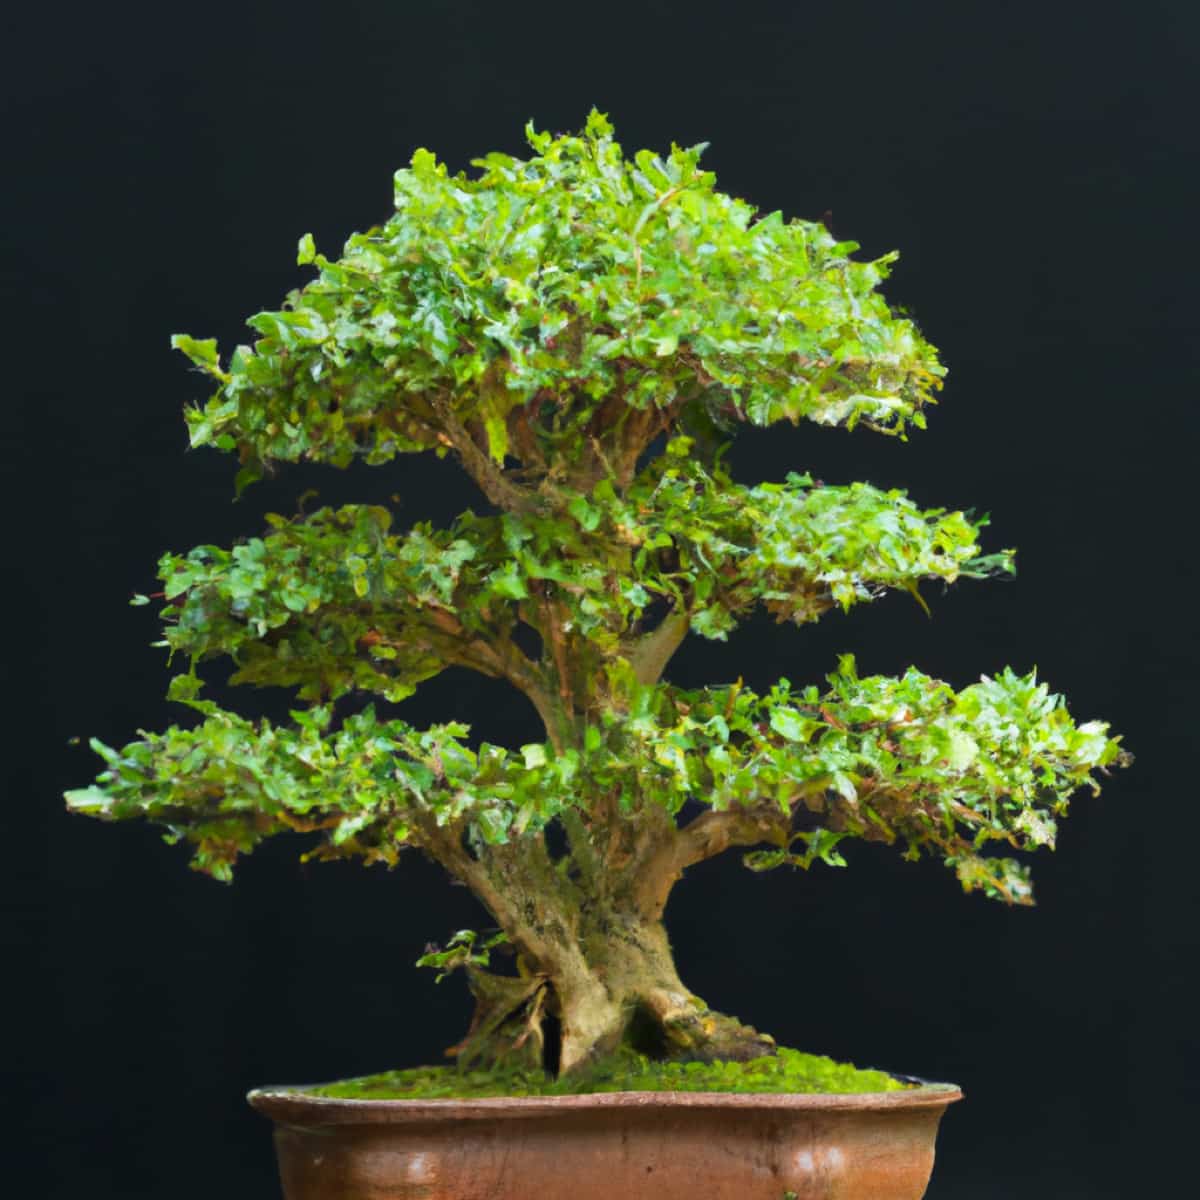 How to Grow and Care for Buxus Bonsai